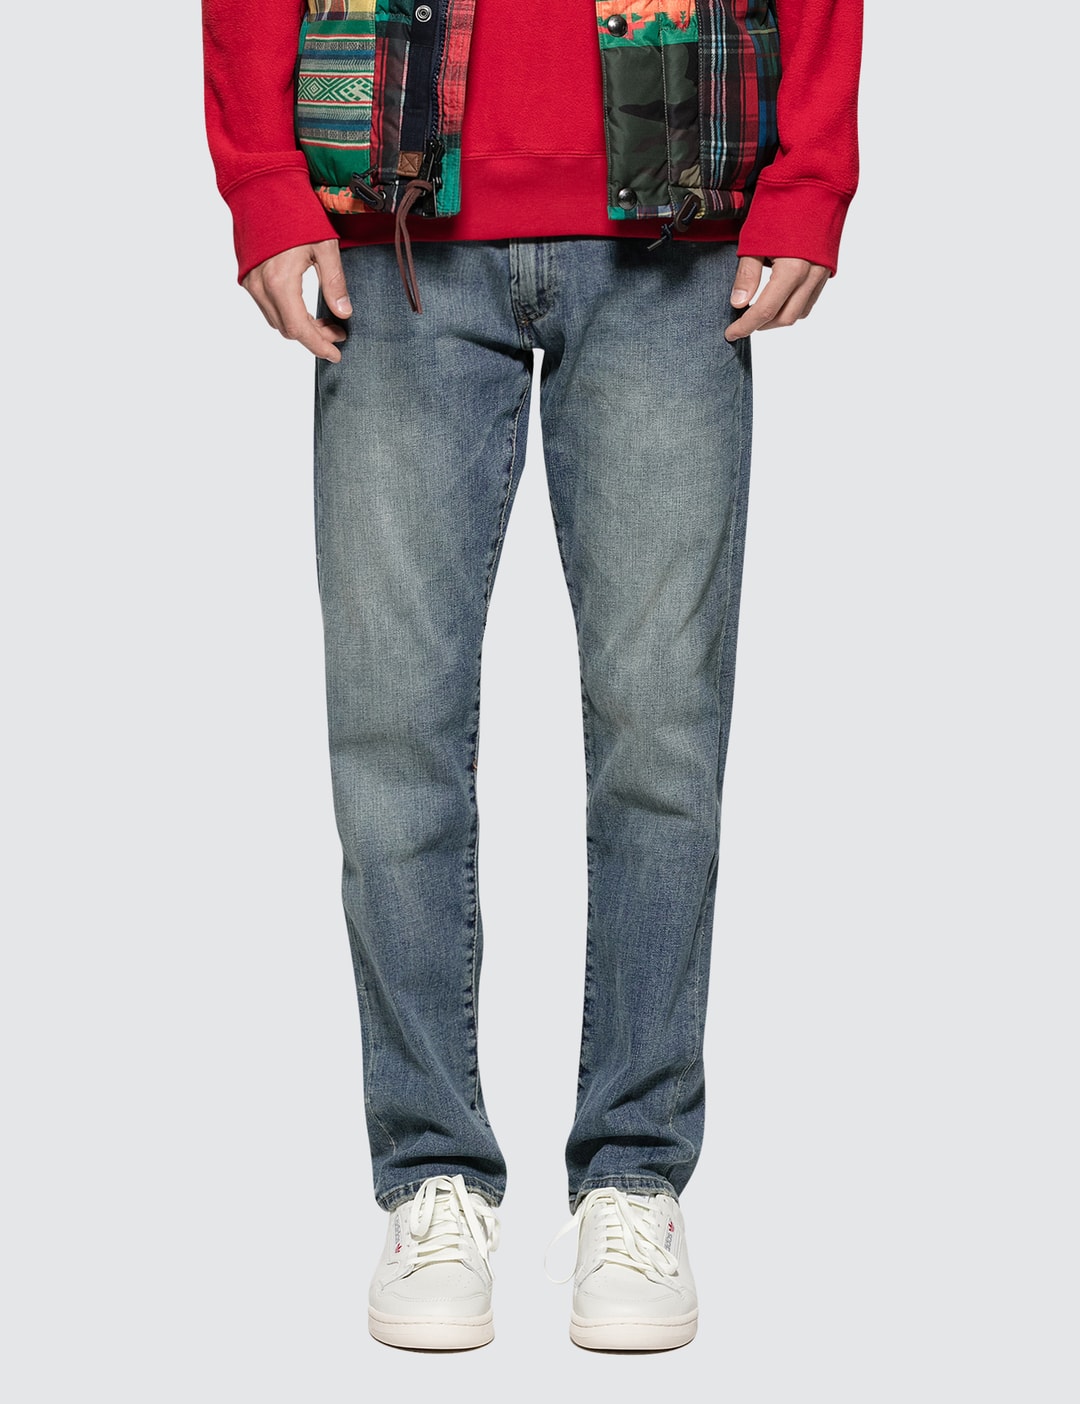 Polo Ralph Lauren - Hampton Straight Fit Denim Jeans | HBX - Globally  Curated Fashion and Lifestyle by Hypebeast